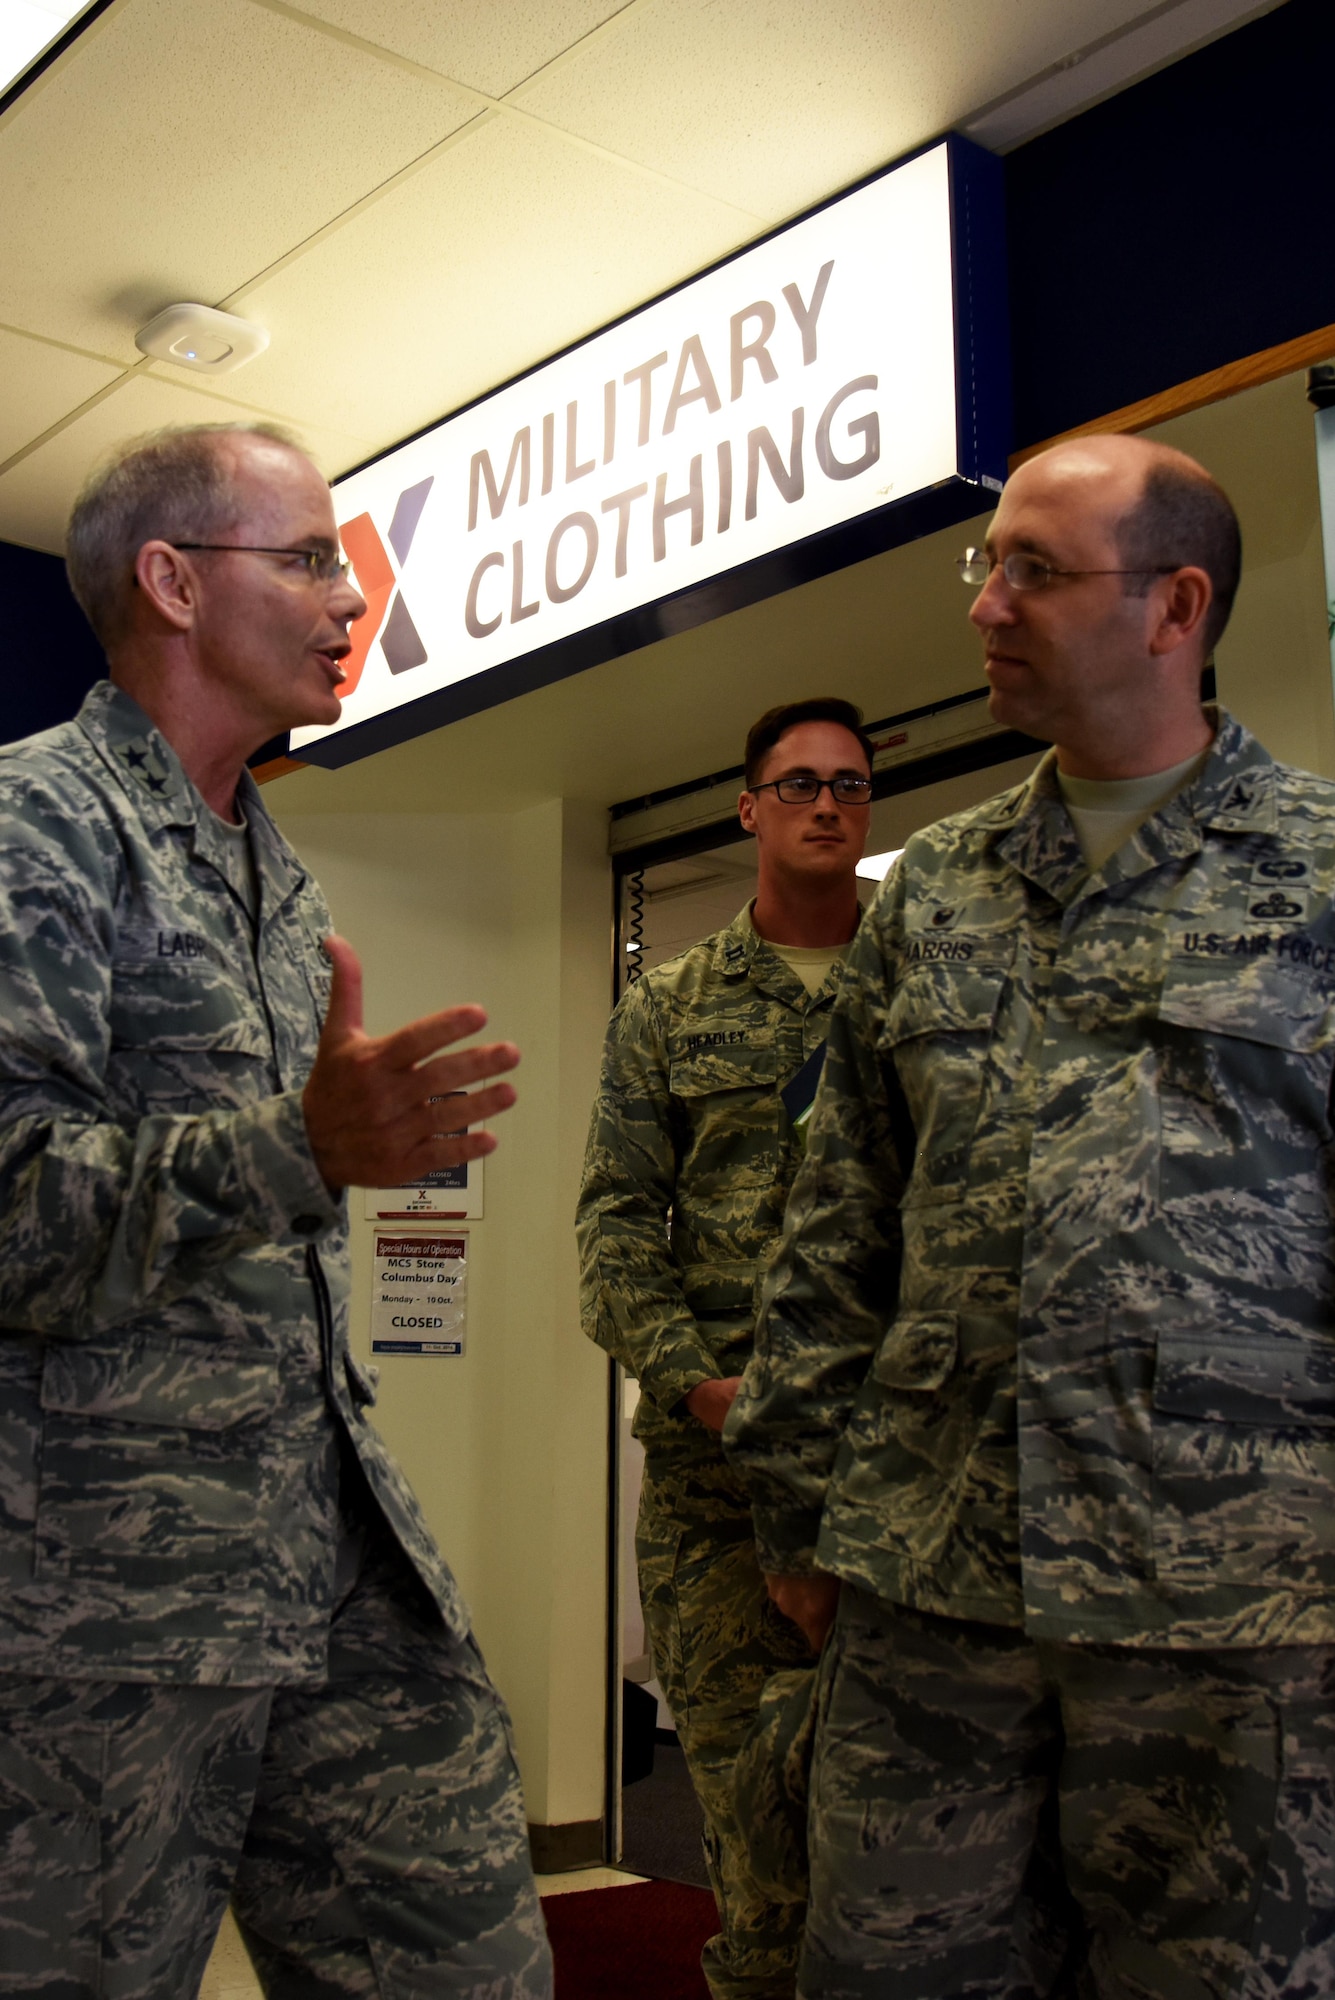 U.S. Air Force Maj. Gen. Bob LaBrutta, 2nd Air Force Commander, speaks with Col. Christopher Harris, 17th Mission Support Group Commander, at Goodfellow Air Force Base, Oct. 6, 2016. Labrutta visited the Exchange during a base familiarization tour where he visited future Goodfellow renovation projects. (U.S. Air Force photo by Senior Airman Joshua Edwards/Released)
